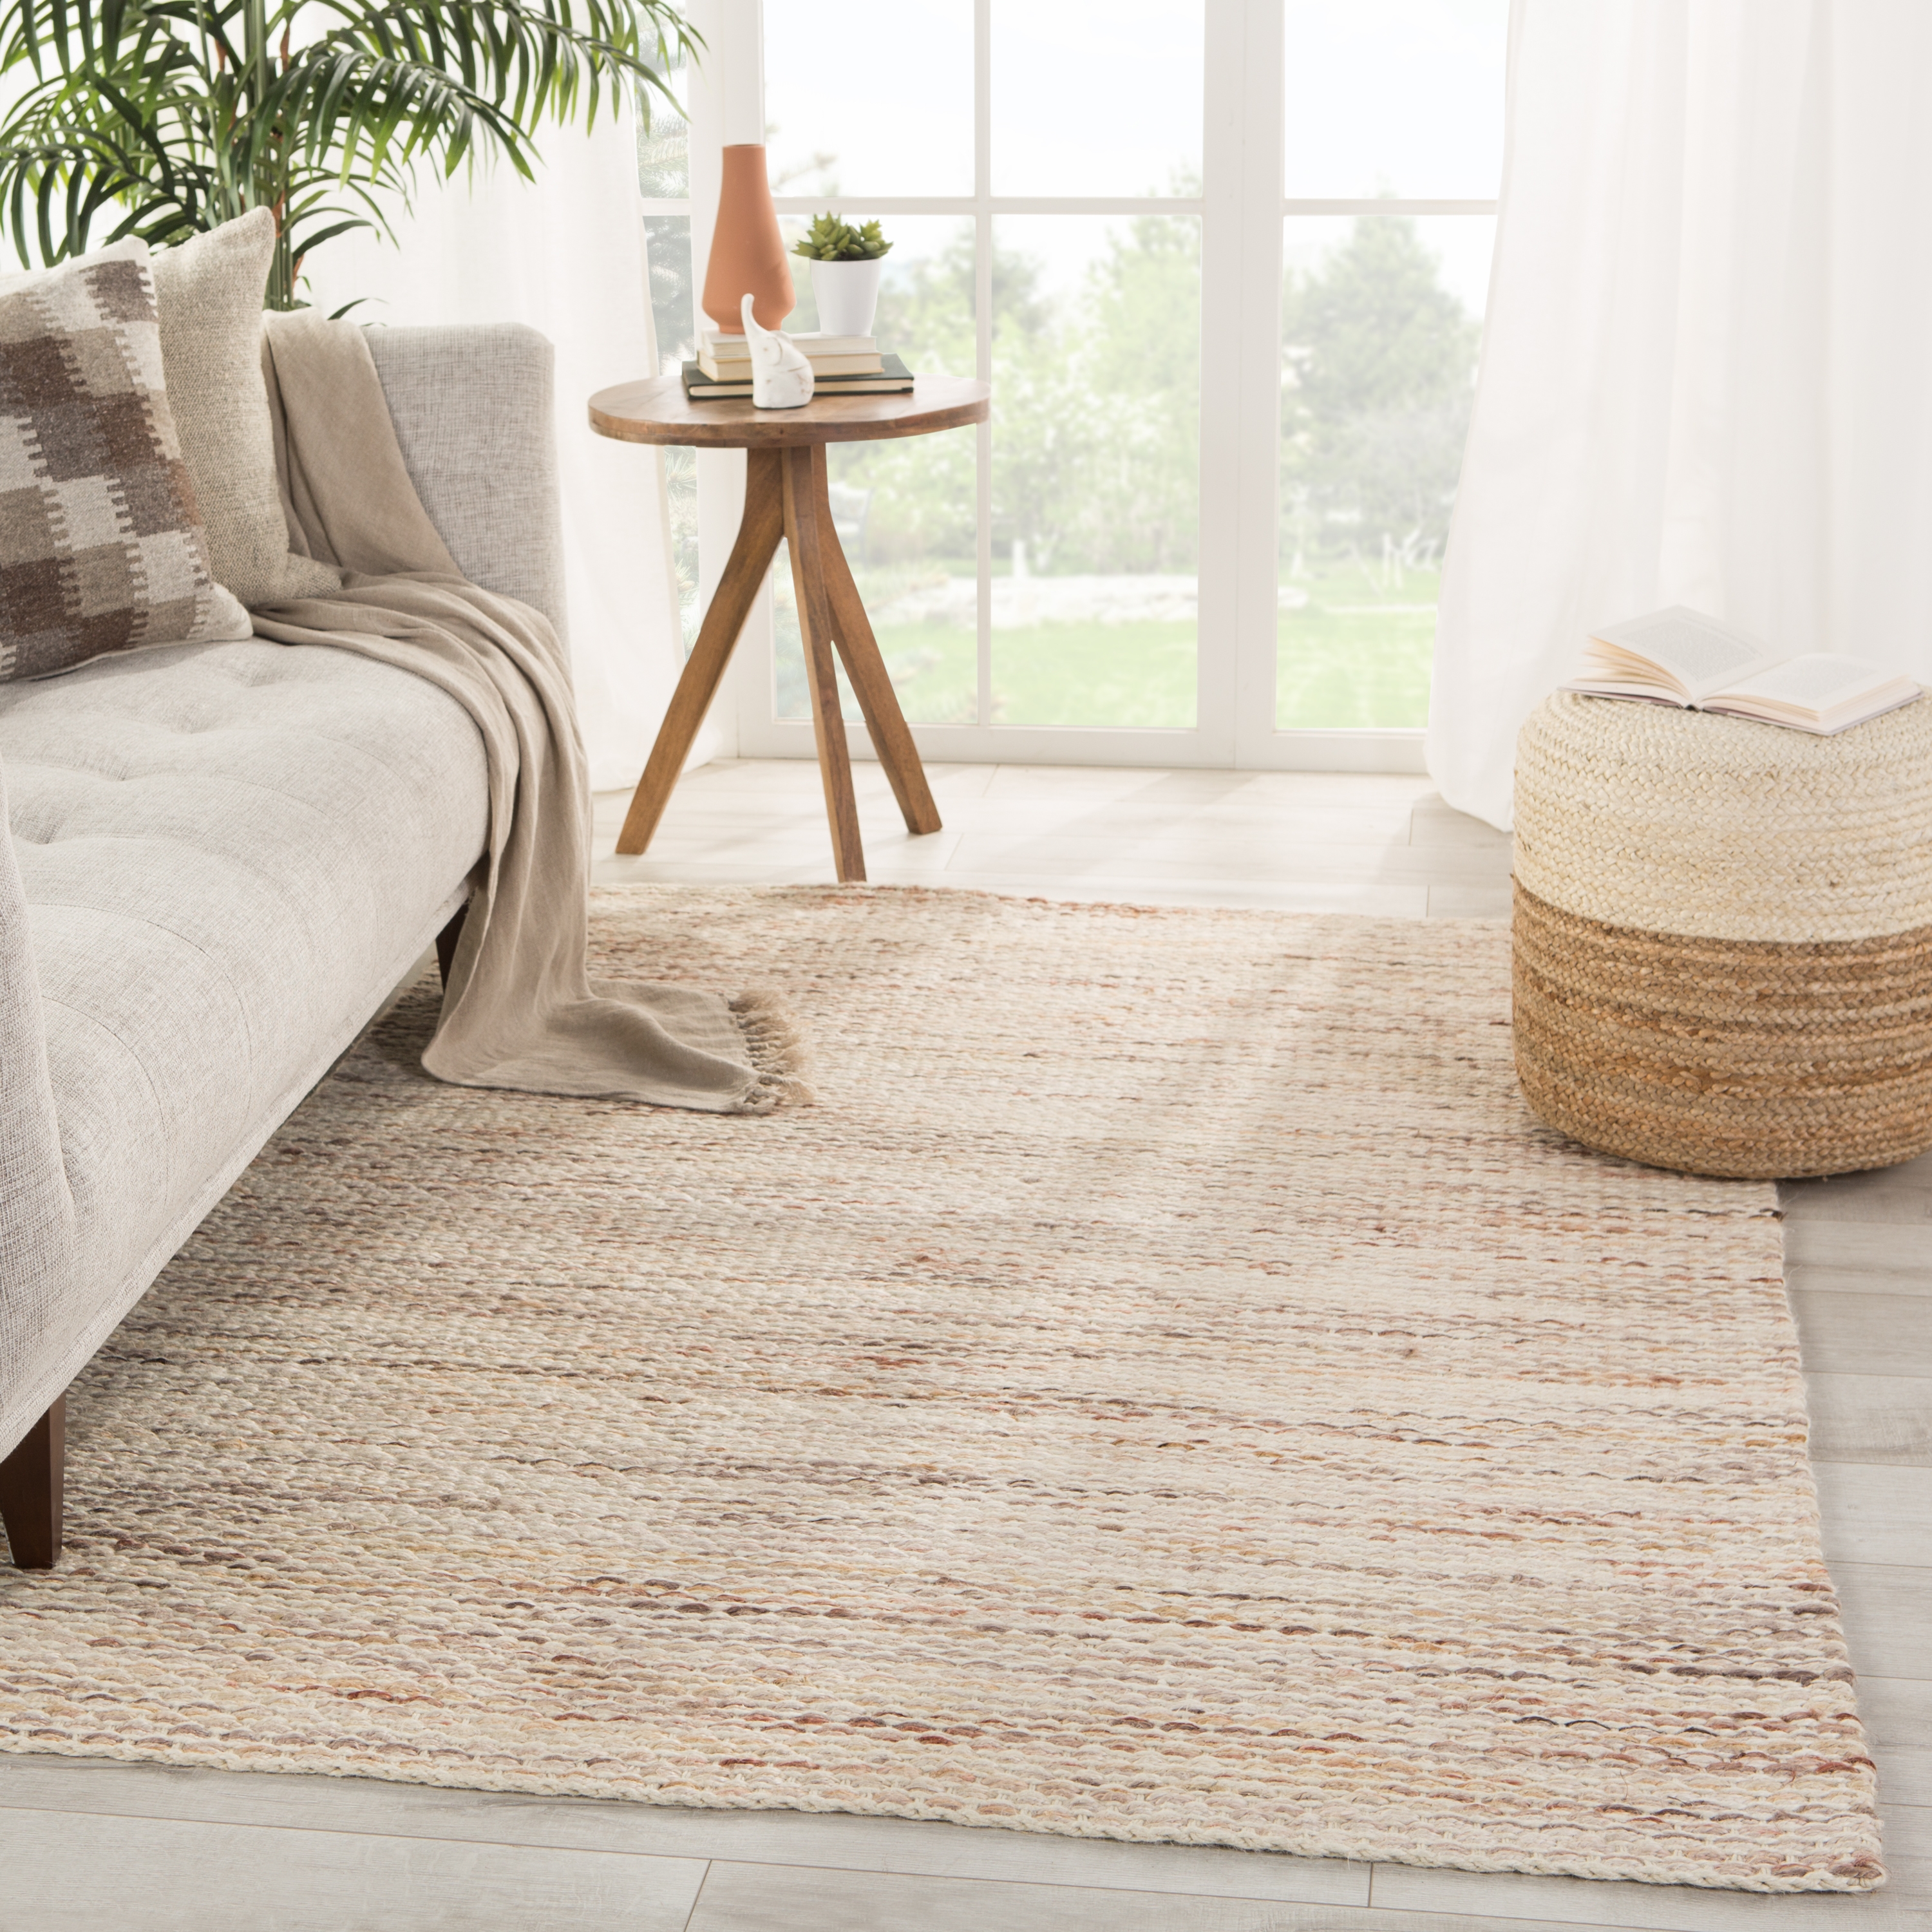 Cirra Natural Solid Ivory/ Terra Cotta Area Rug (9'X12') - Image 4